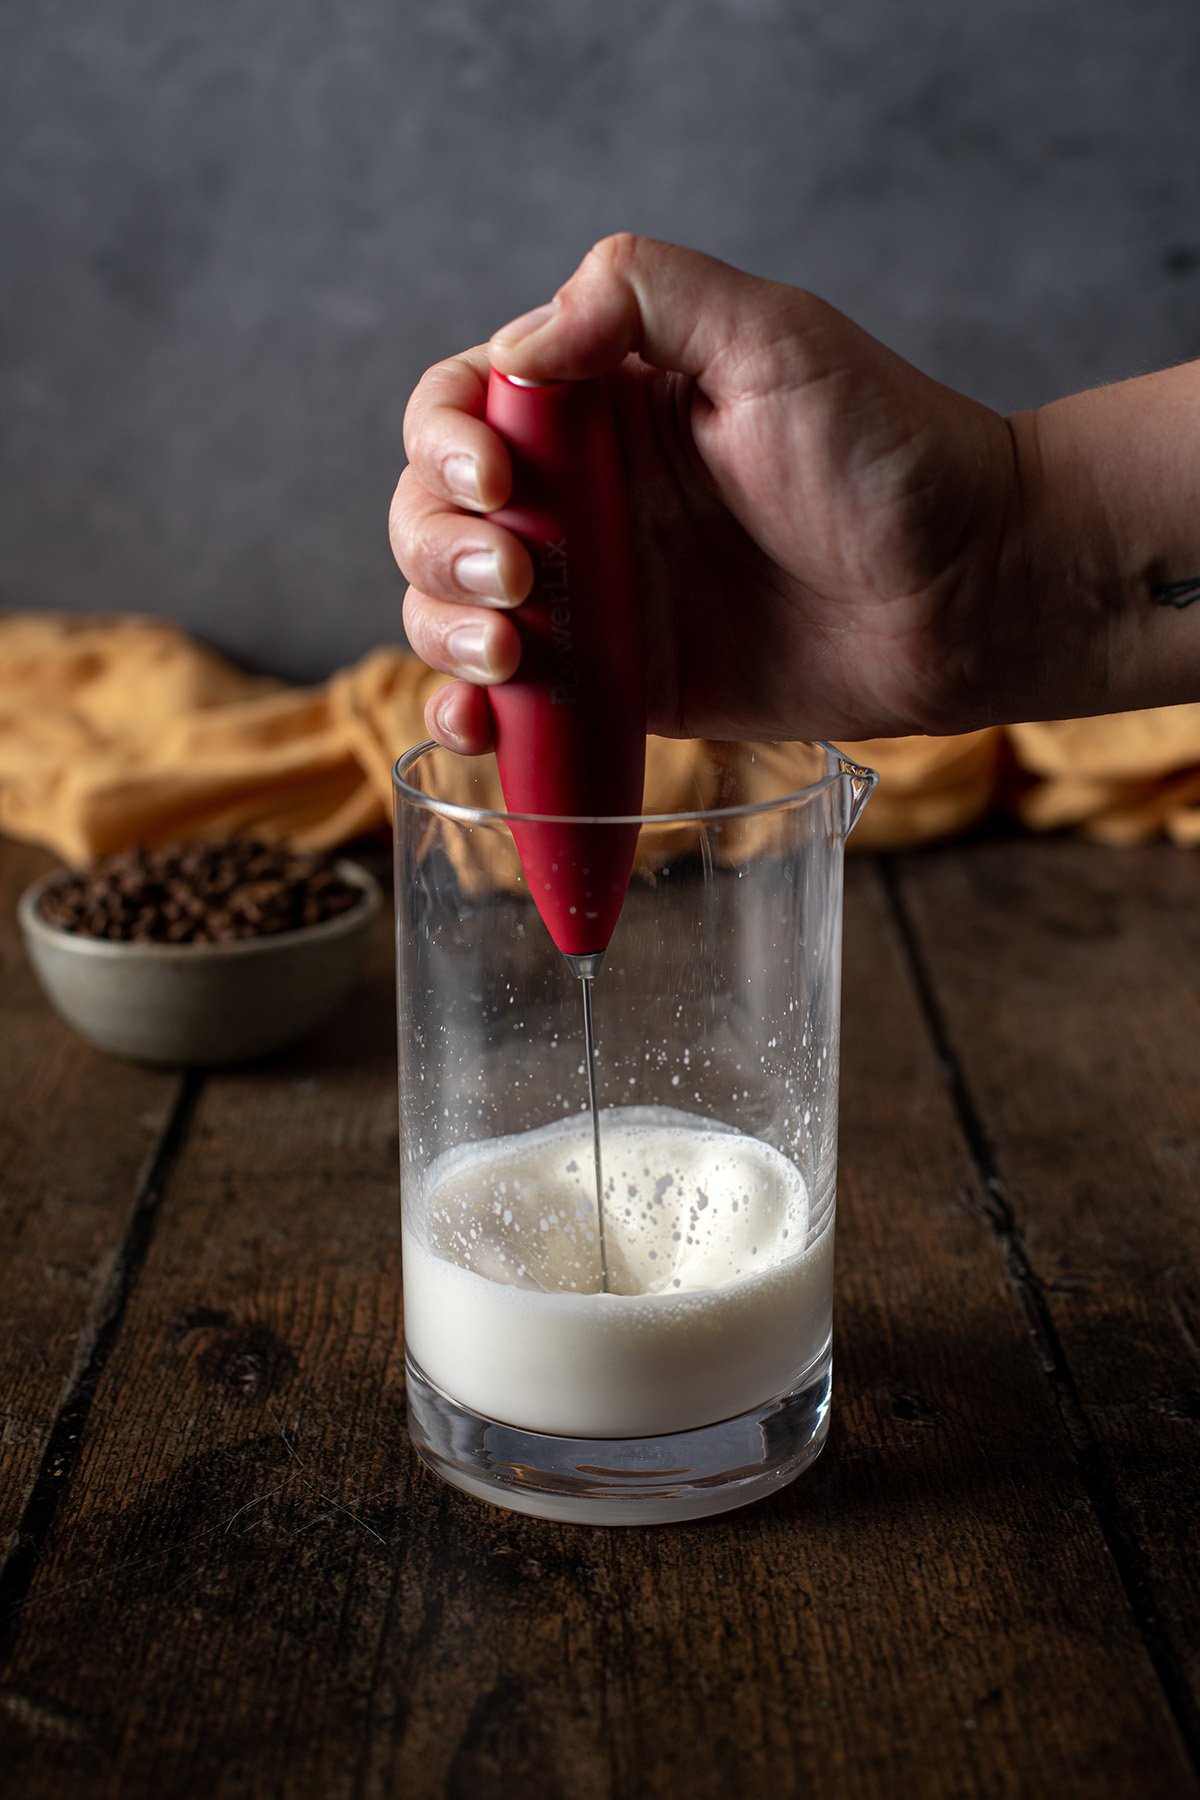 salted caramel cream cold foam being made in a glass jar with a handheld milk frother